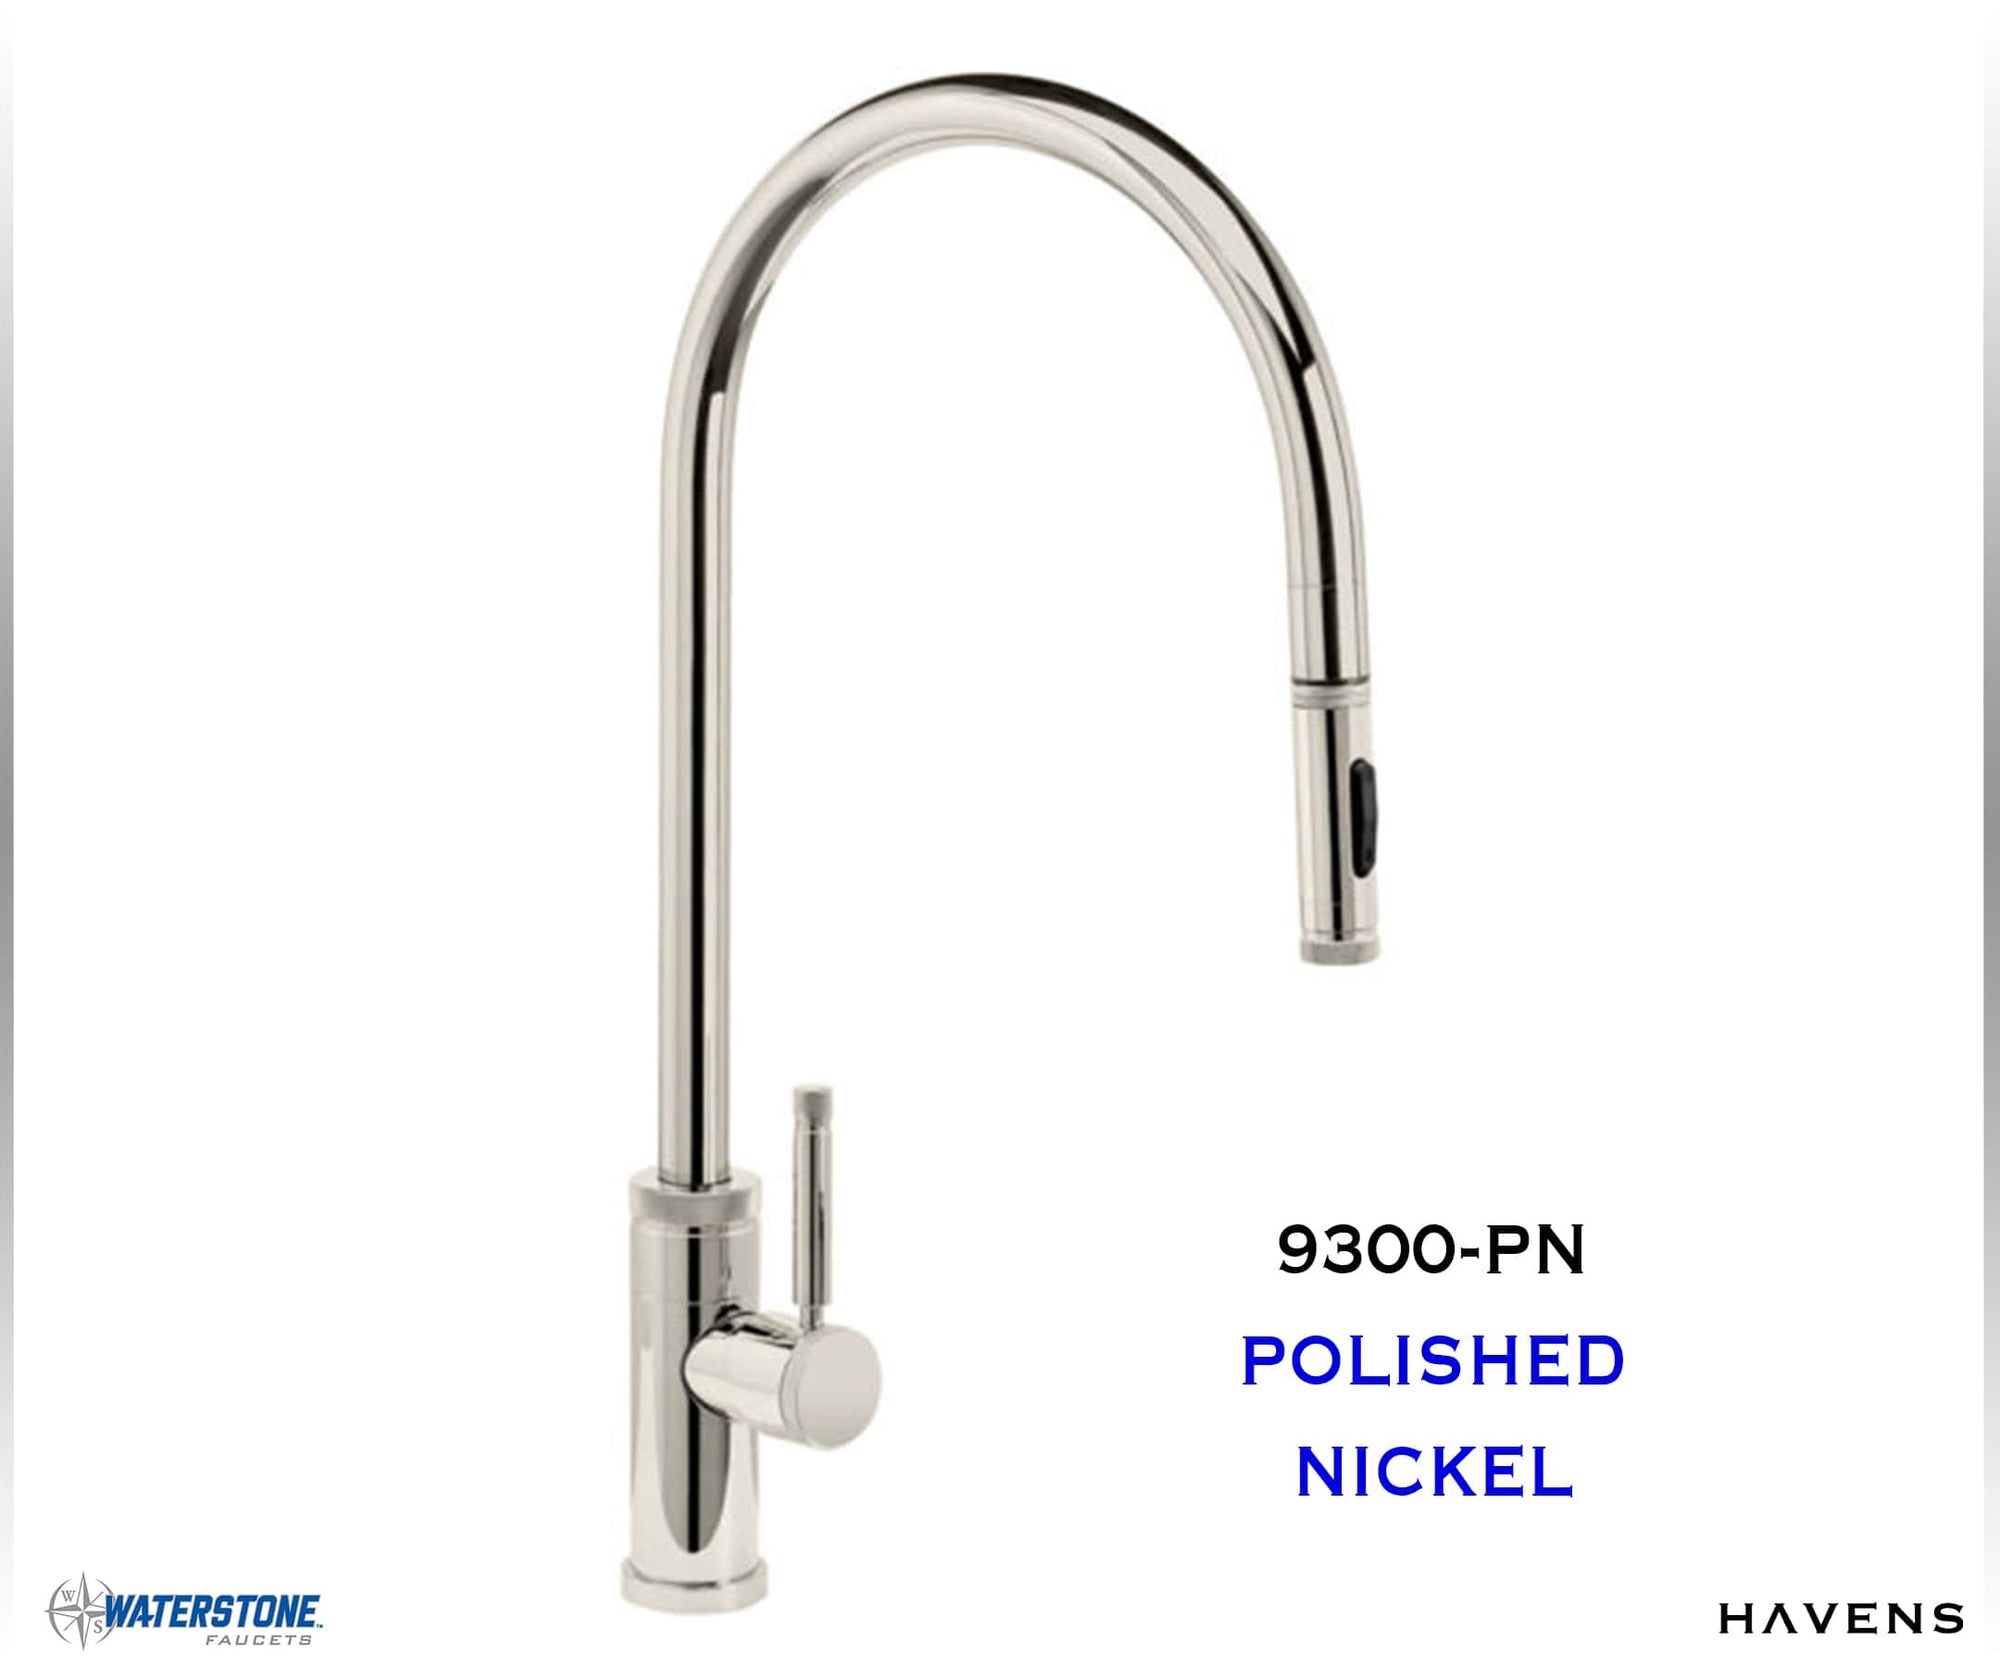 Waterstone Industrial Extended Reach PLP Pulldown Faucet 9300